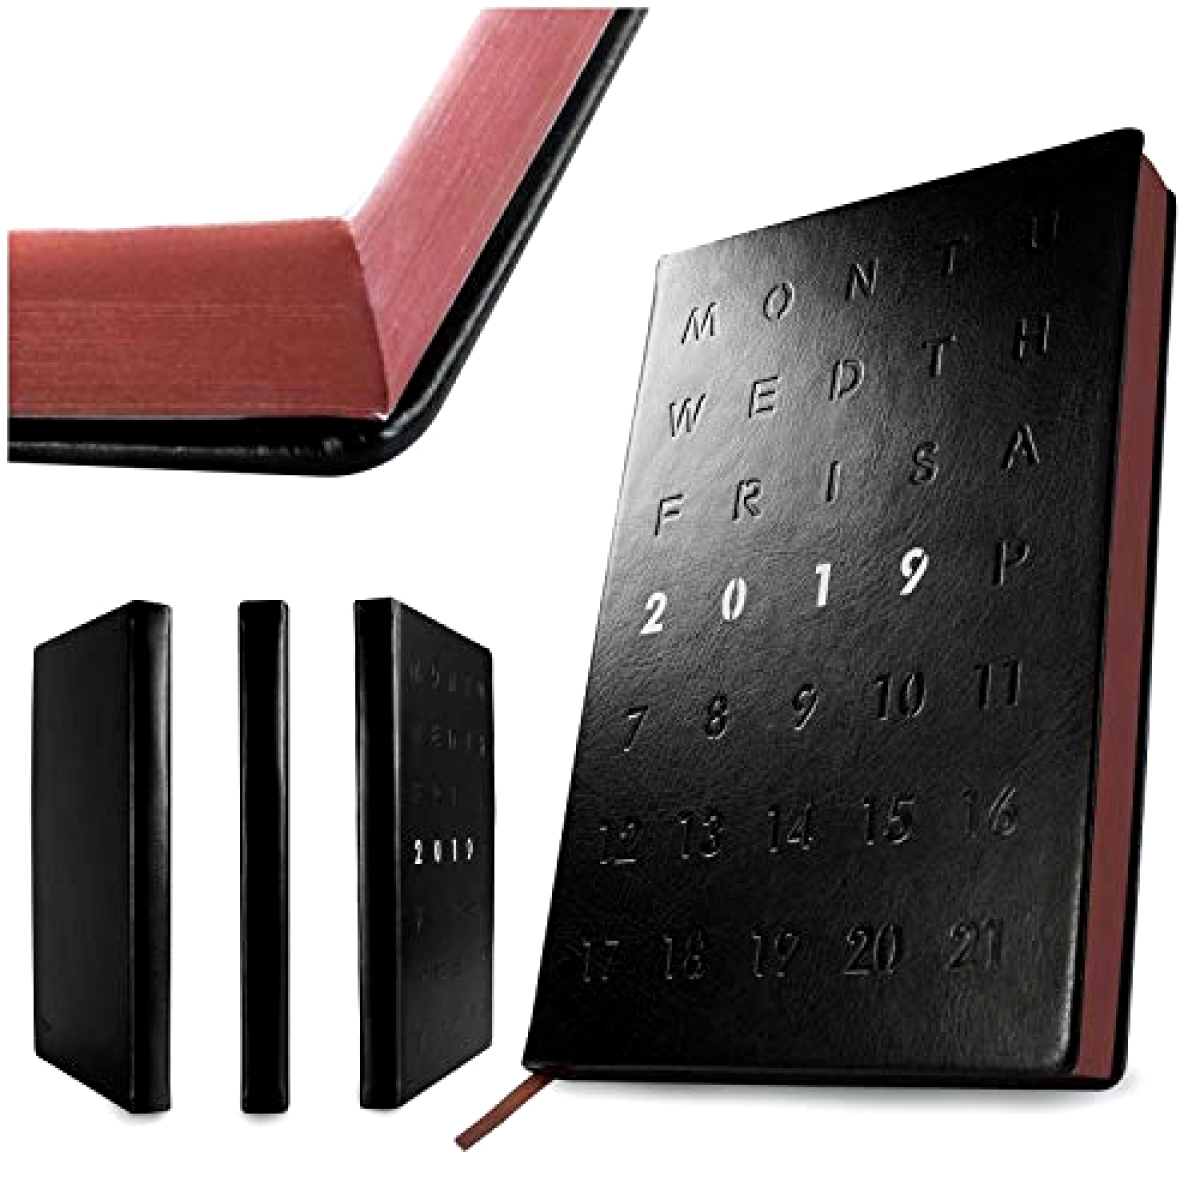 Daily Planner 2019 Agenda Academic And Life Calendar - 8X5.5 Leather  Hardcover